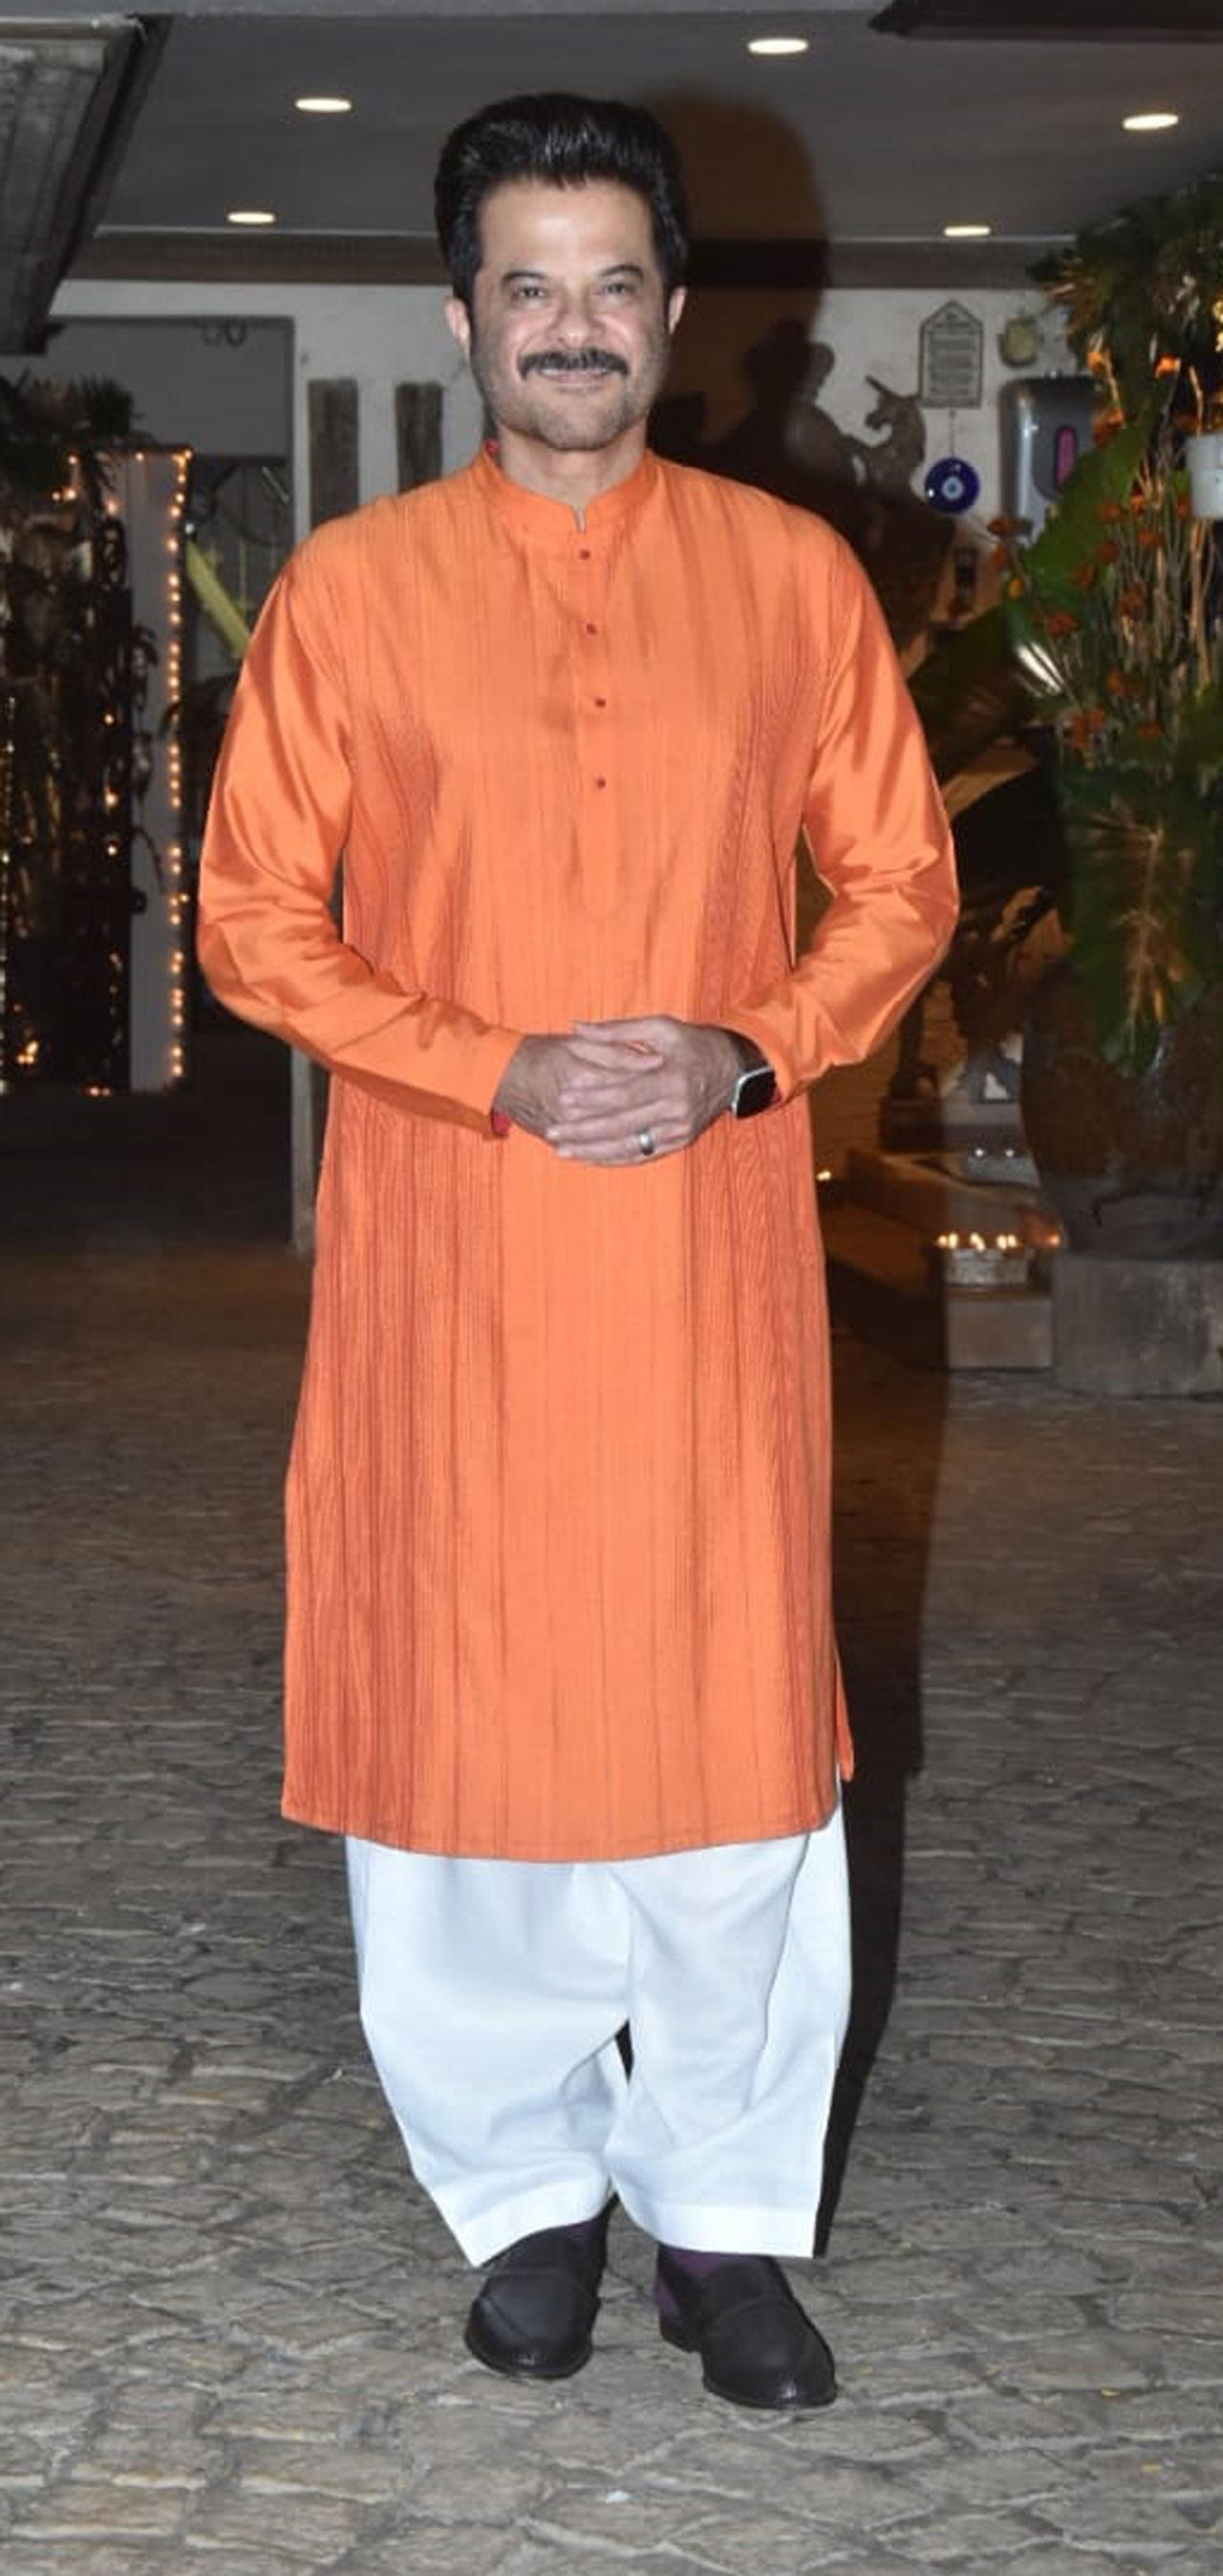 Host Anil Kapoor who welcomed the guests wearing a black pant with a full sleeved tee, quickly changed into a bright orange kurta before the festivities began. In true Anil Kapoor style, he happily posed for the shutterbugs looking as handsome as ever.